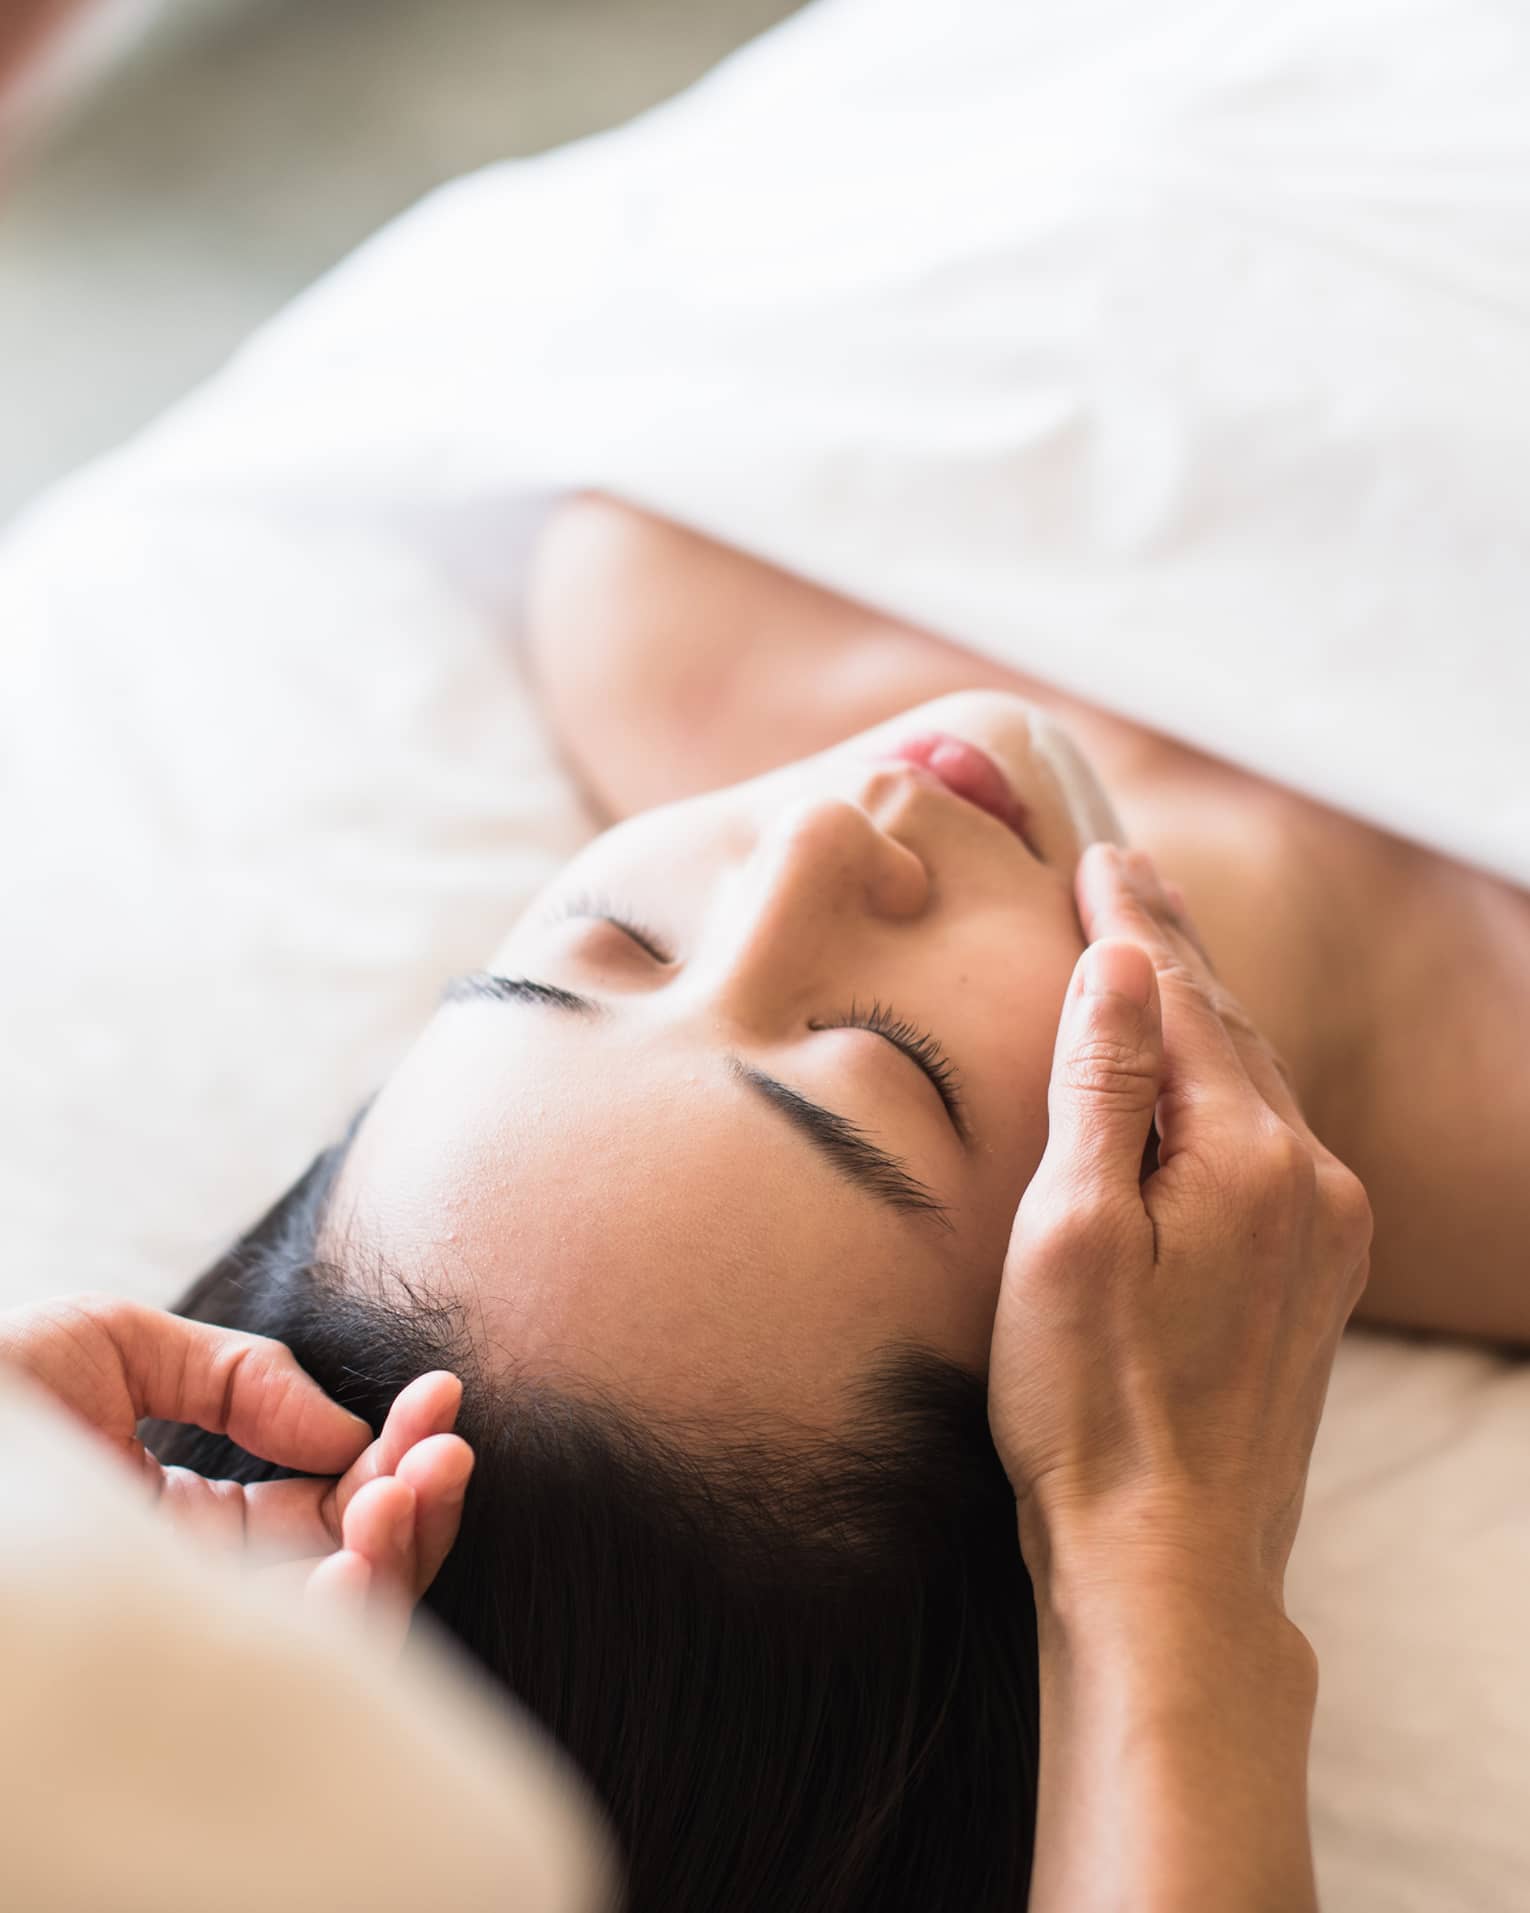 Woman lying under white sheet on massage table, eyes closed as spa staff rubs lotion on her chin